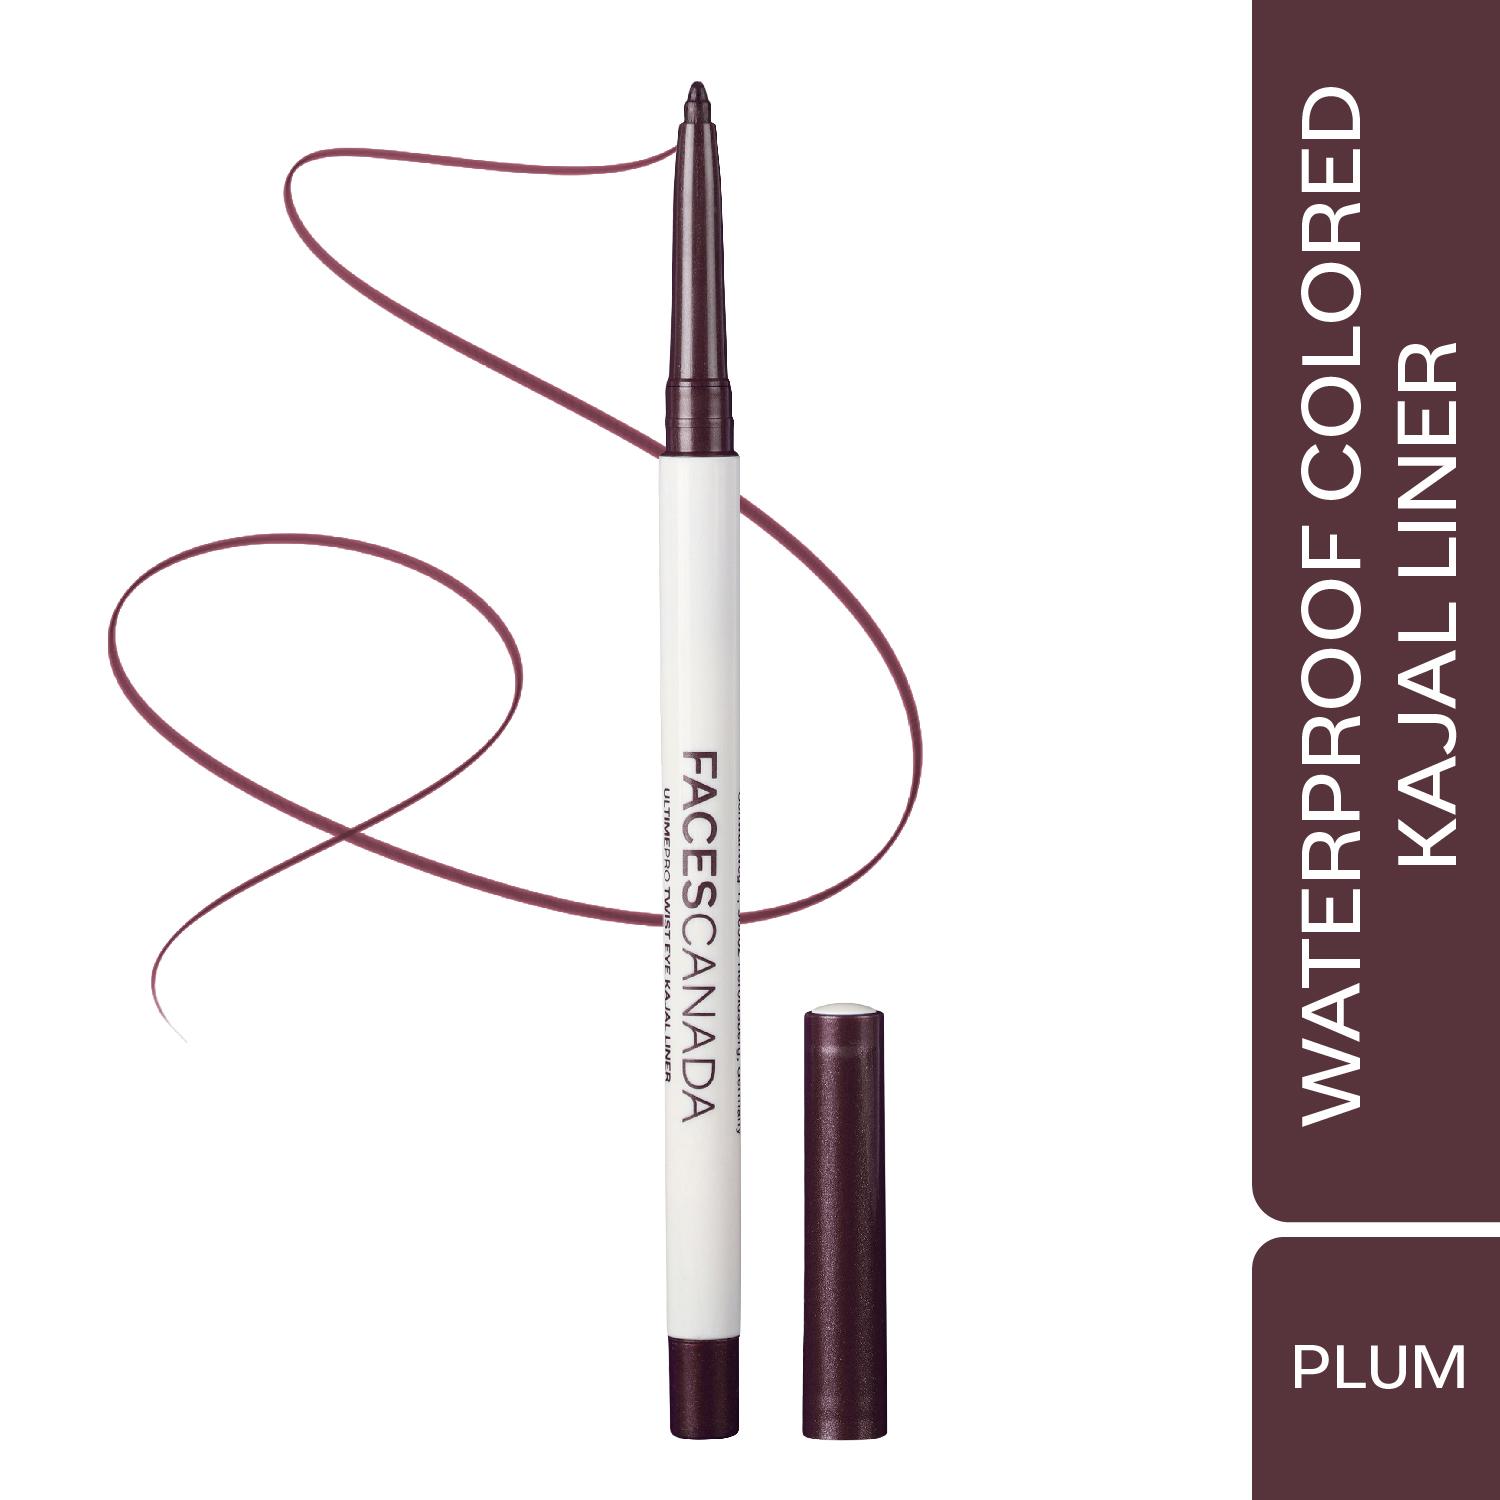 Faces Canada | Faces Canada Ultime Pro Twist Eye Kajal Liner - Plum, Intense Color, 24HR Stay, Waterproof (0.35 g)